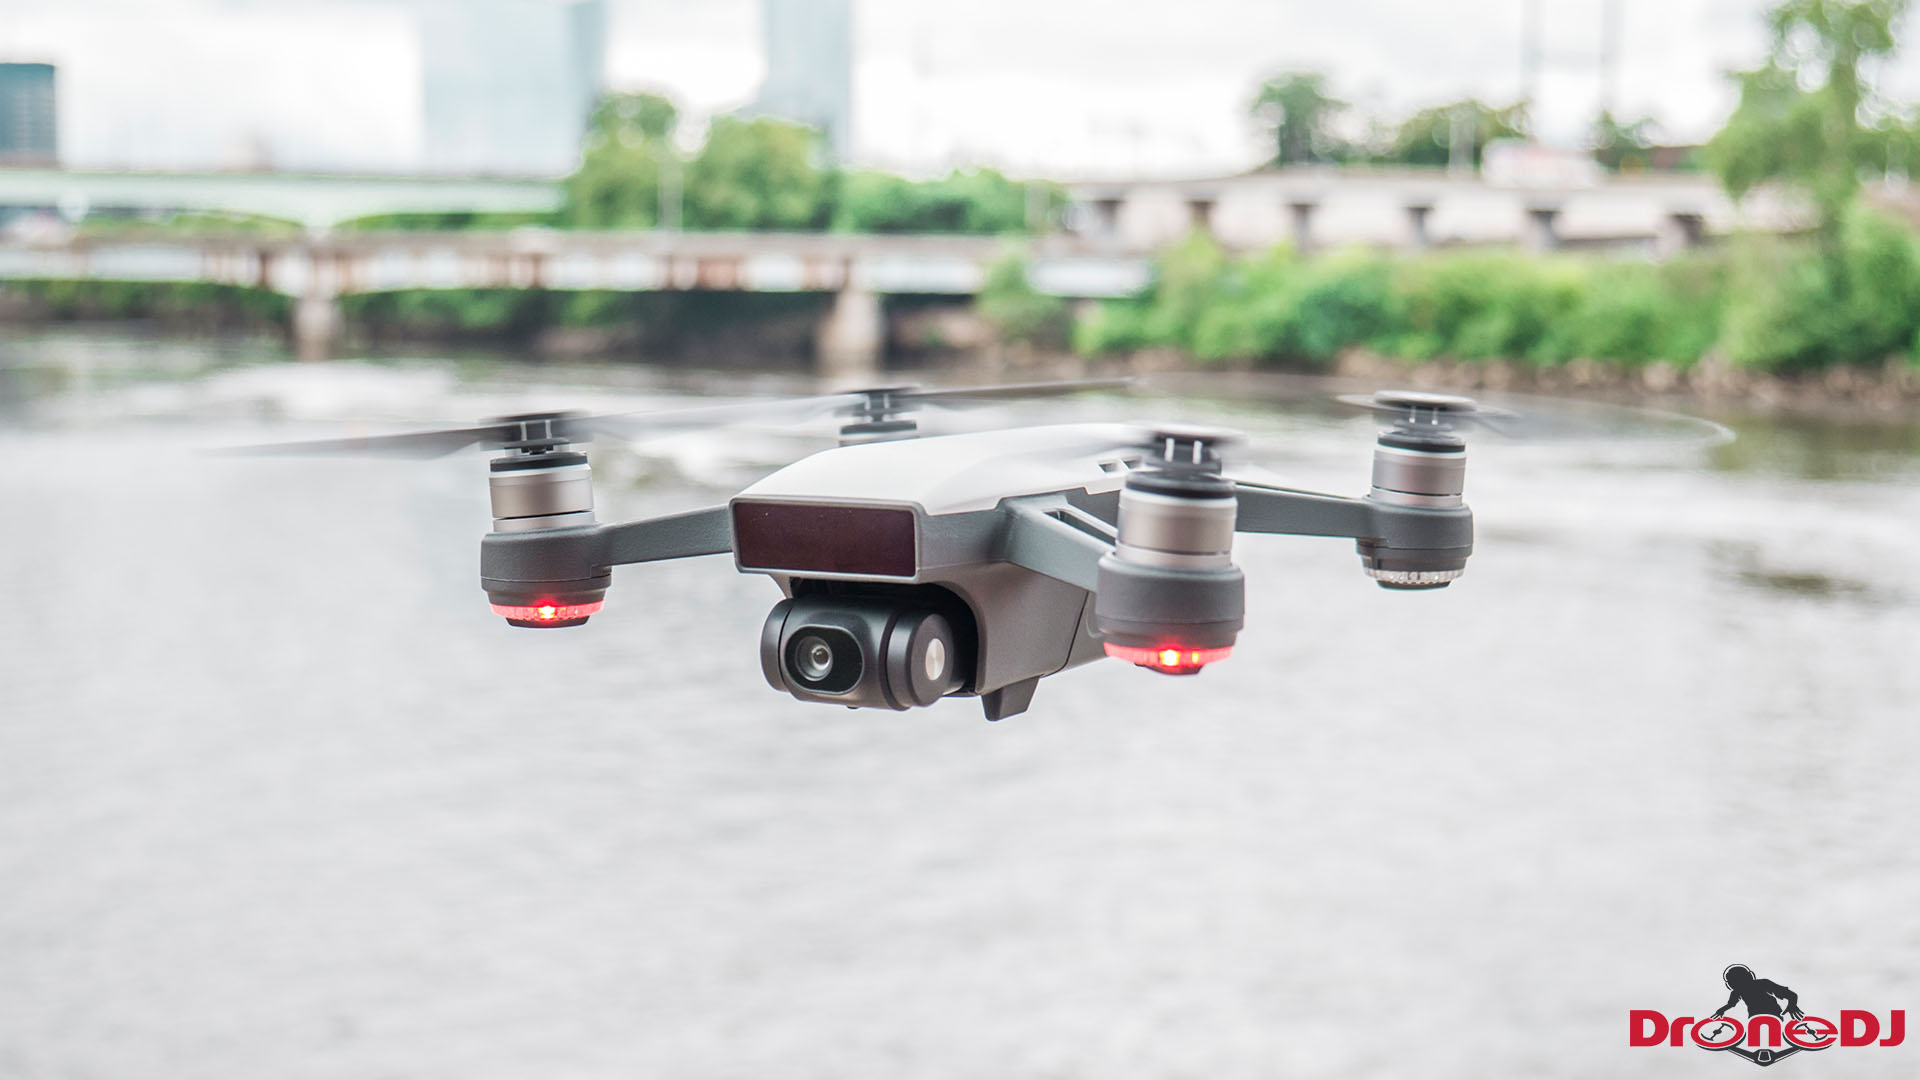 The DJI Spark is still the best beginner drone you can buy